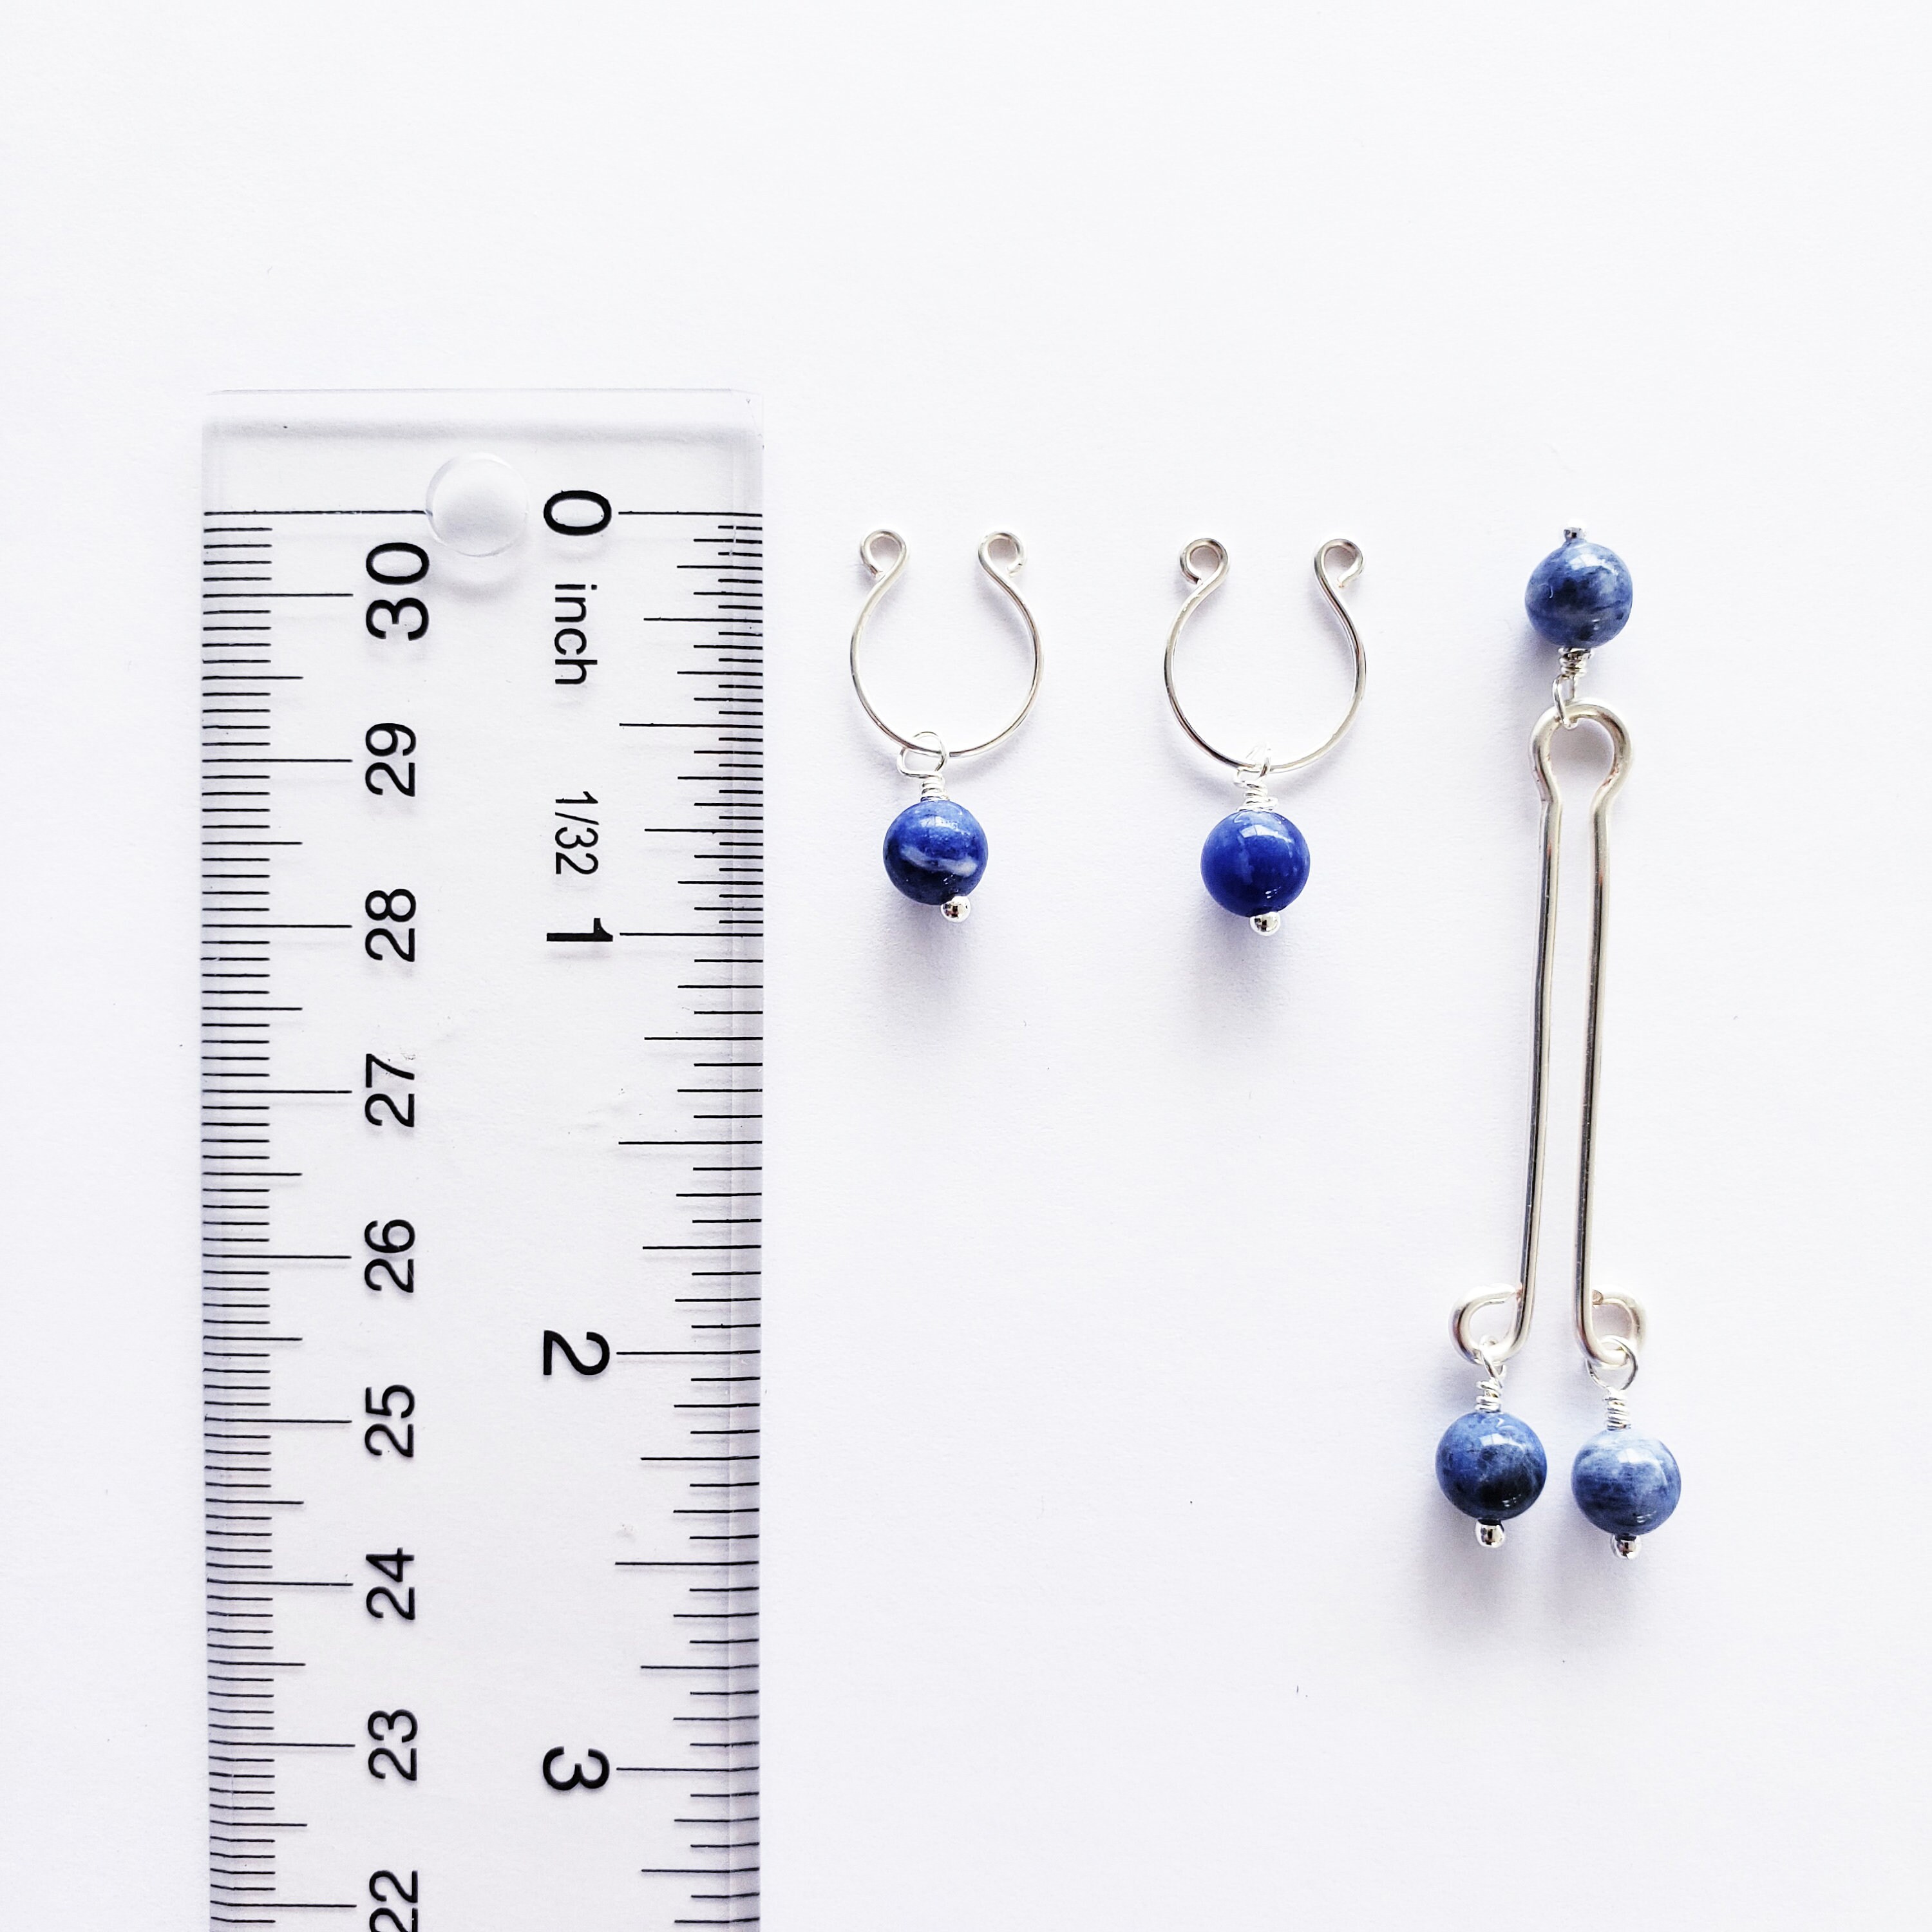 Non Piercing Nipple Rings and Labia Clip Set. Non Piercing. With Blue Stone Beads. Not Pierced Intimate Body Jewelry for Women, BDSM, MATURE photo